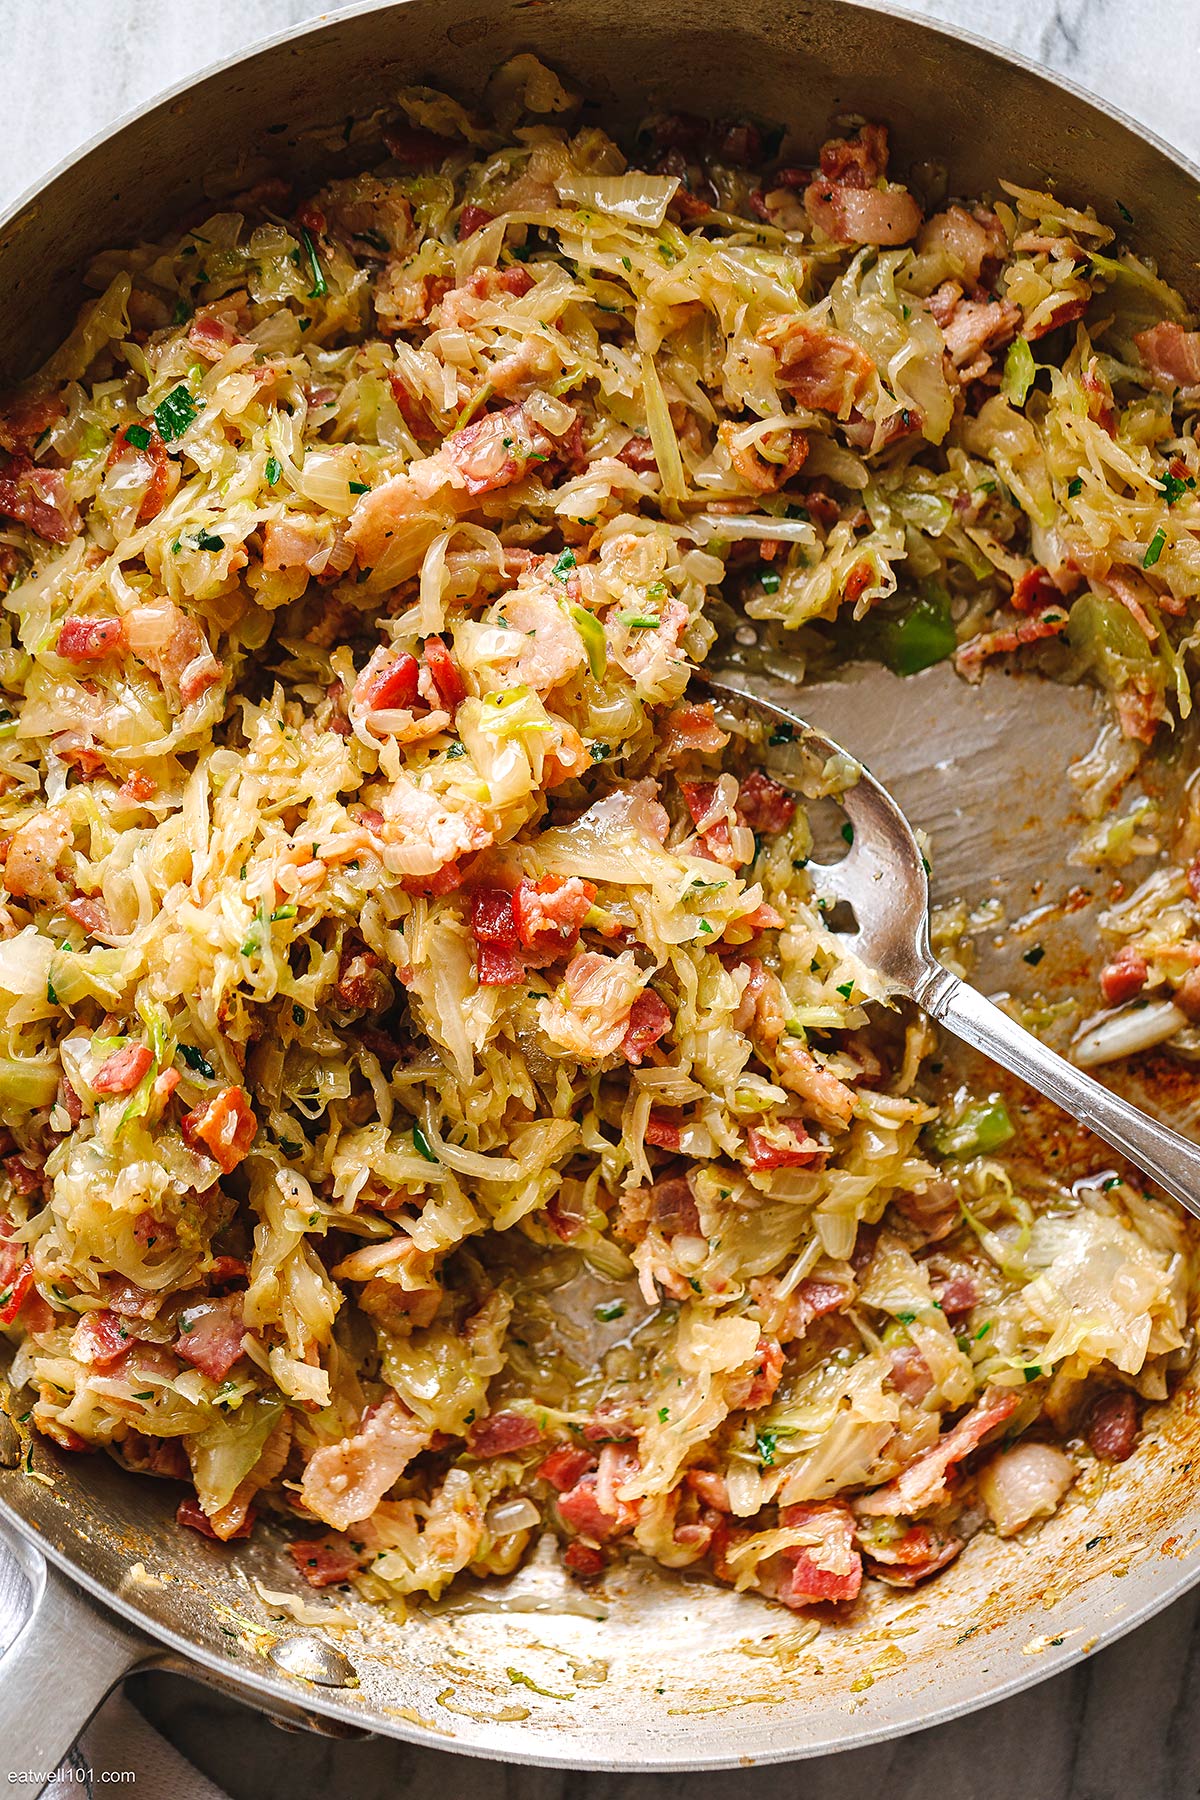 Bacon Cabbage Skillet - #recipe by #eatwell101 - https://www.eatwell101.com/bacon-cabbage-recipe